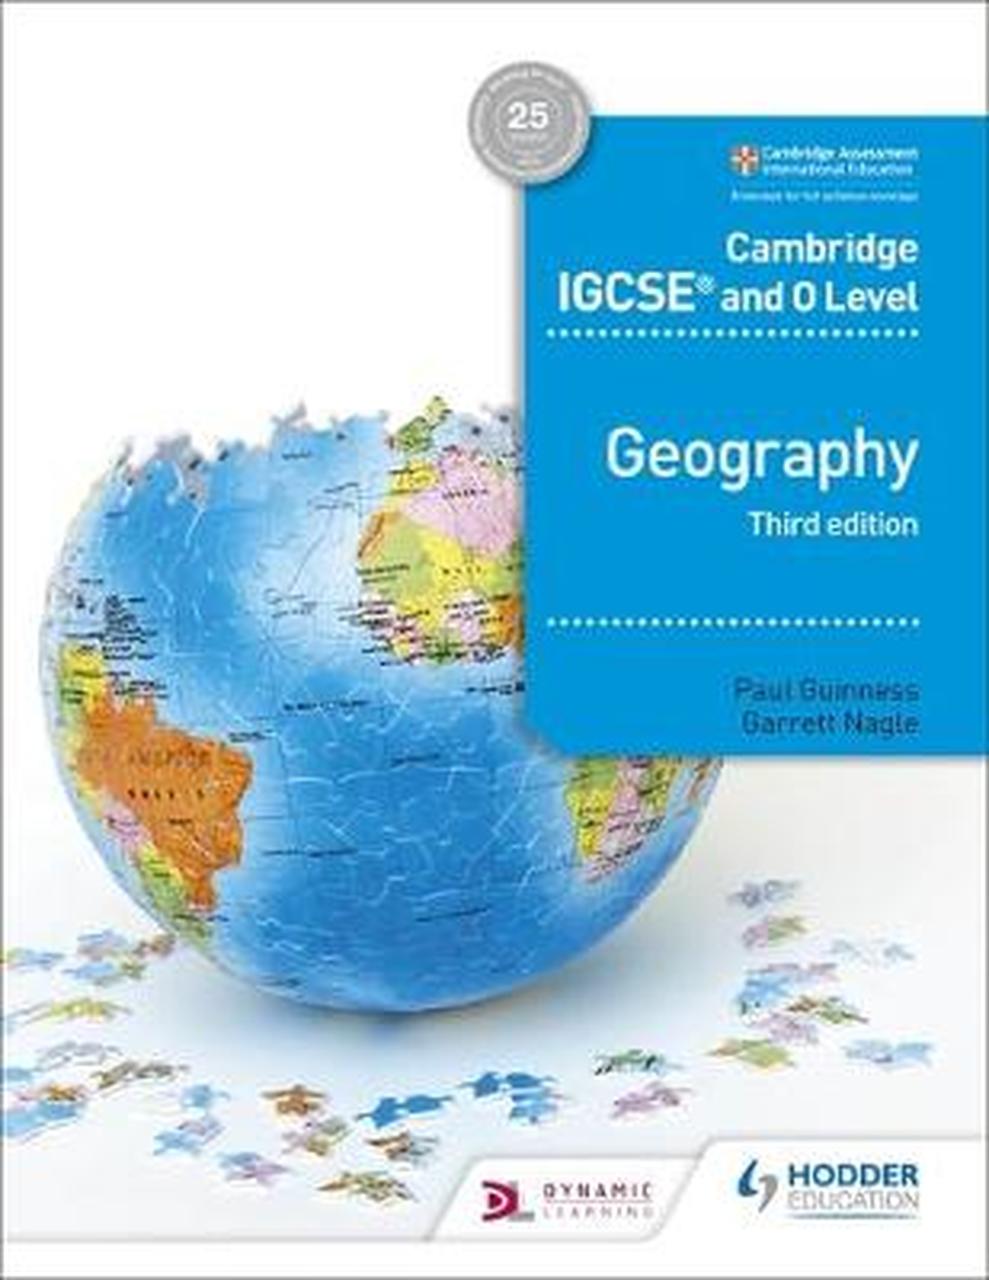 igcse geography coursework examples